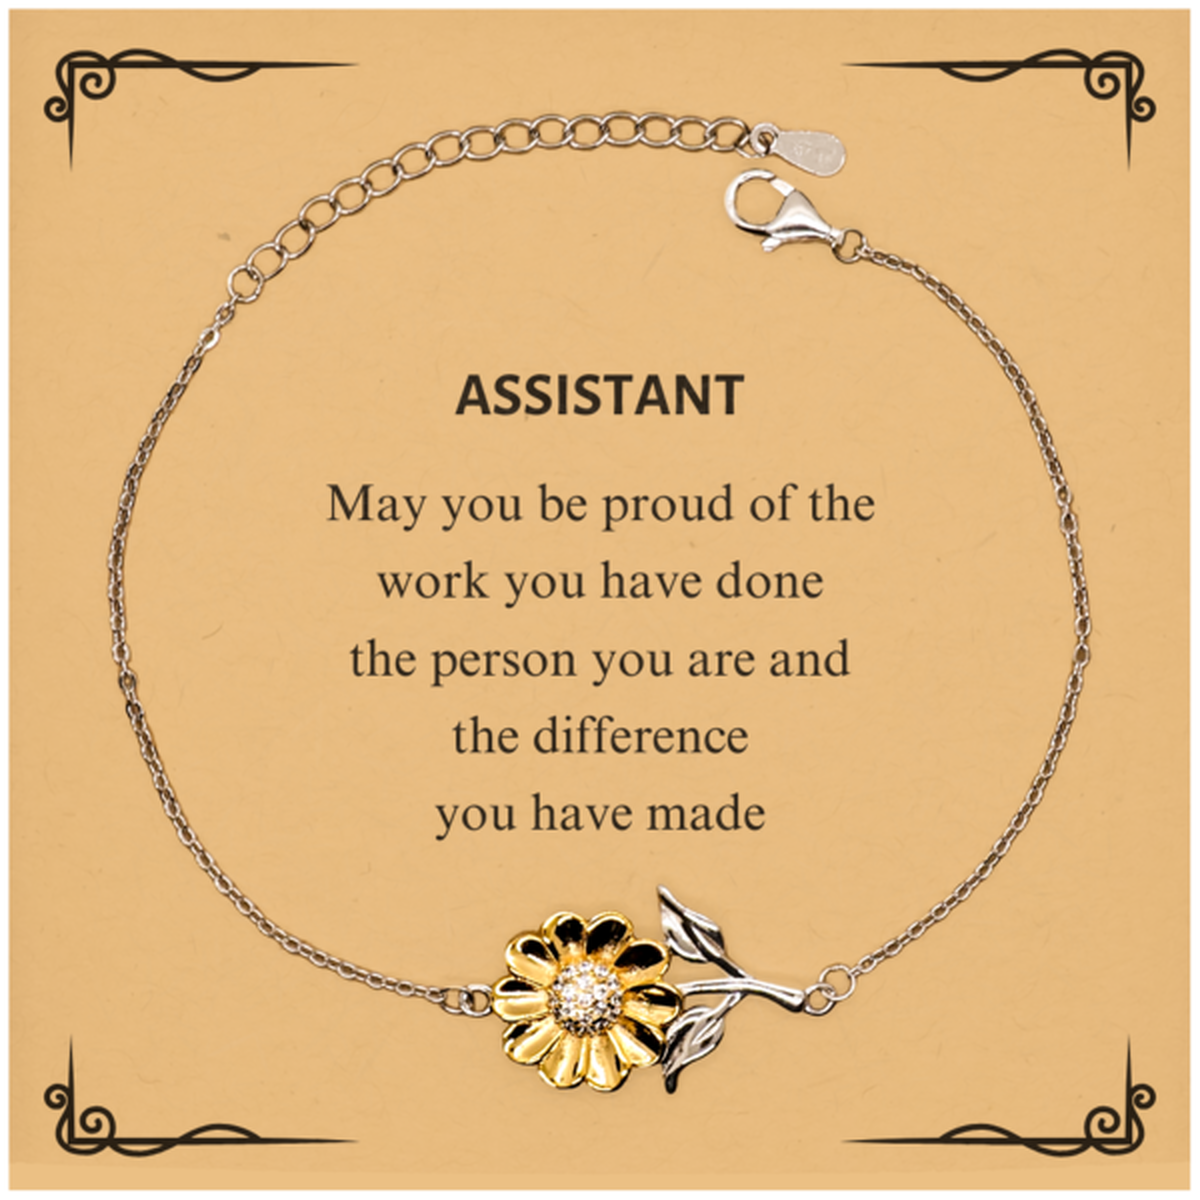 Assistant May you be proud of the work you have done, Retirement Assistant Sunflower Bracelet for Colleague Appreciation Gifts Amazing for Assistant